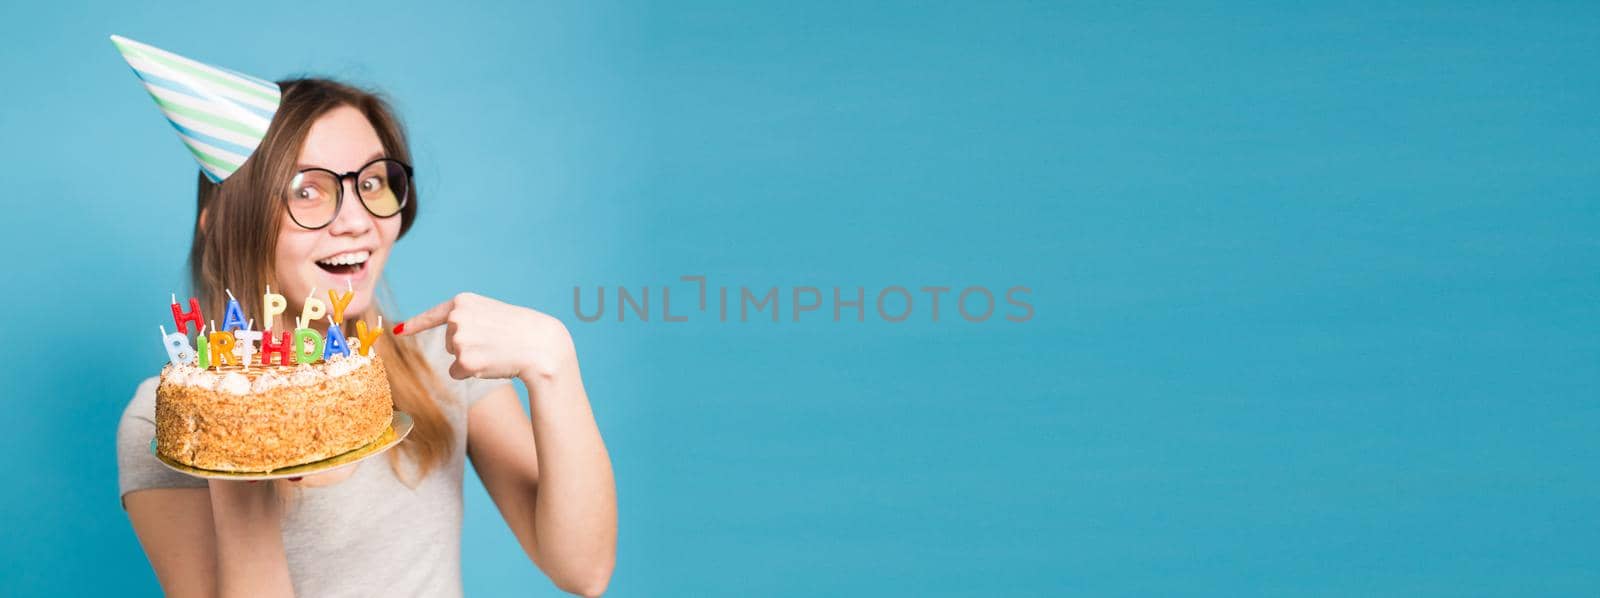 Banner charming merry crazy young girl student in congratulatory paper hat holding a happy birthday cake in her hands standing against a blue background. Advertising copy space by Satura86